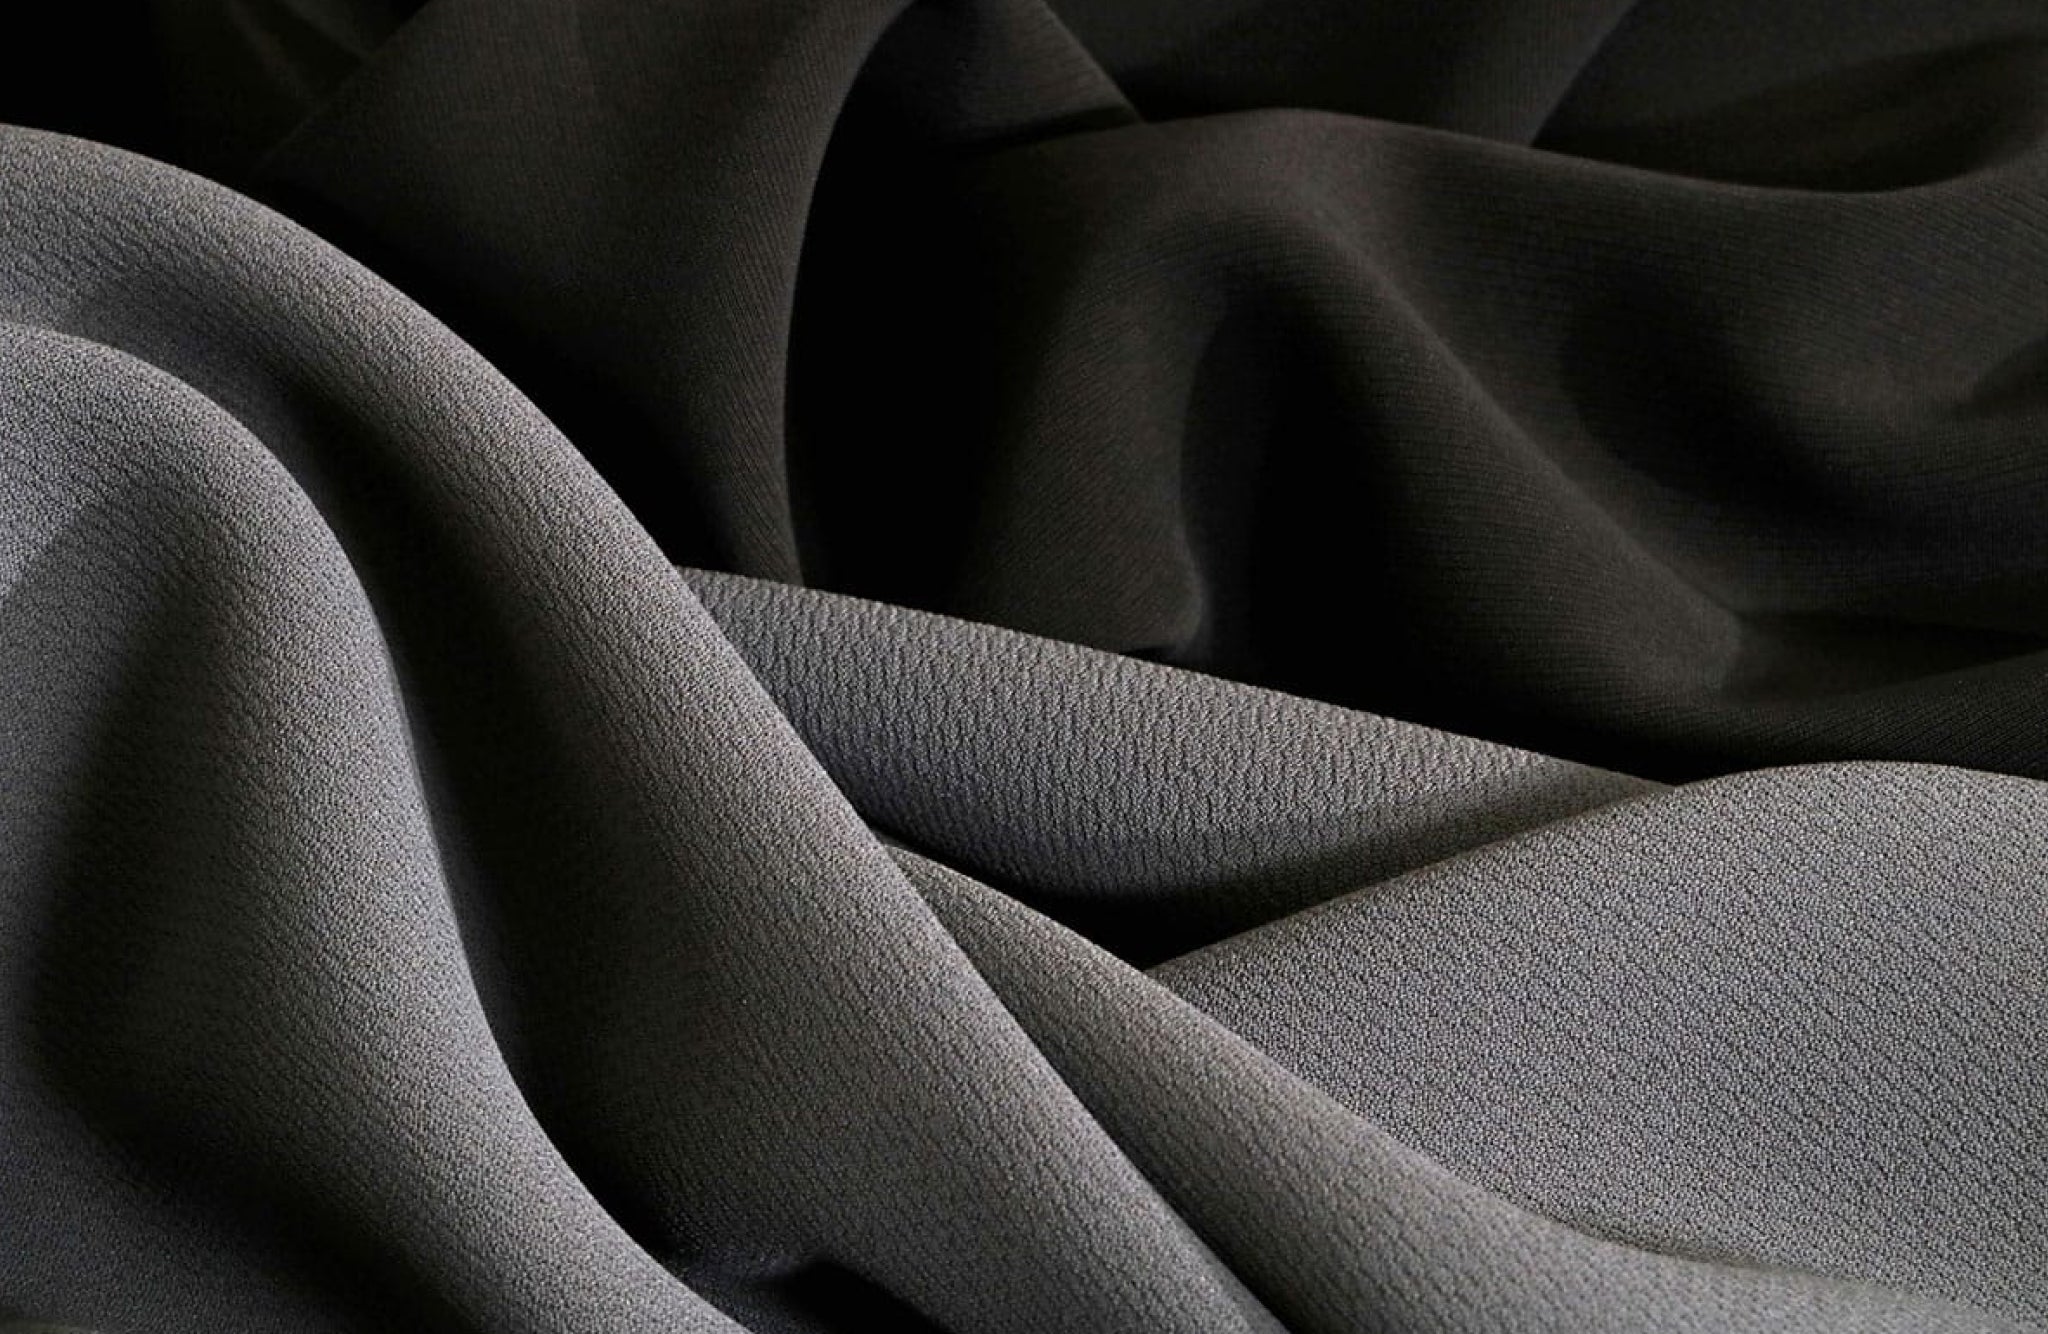 Polyester fabric close up